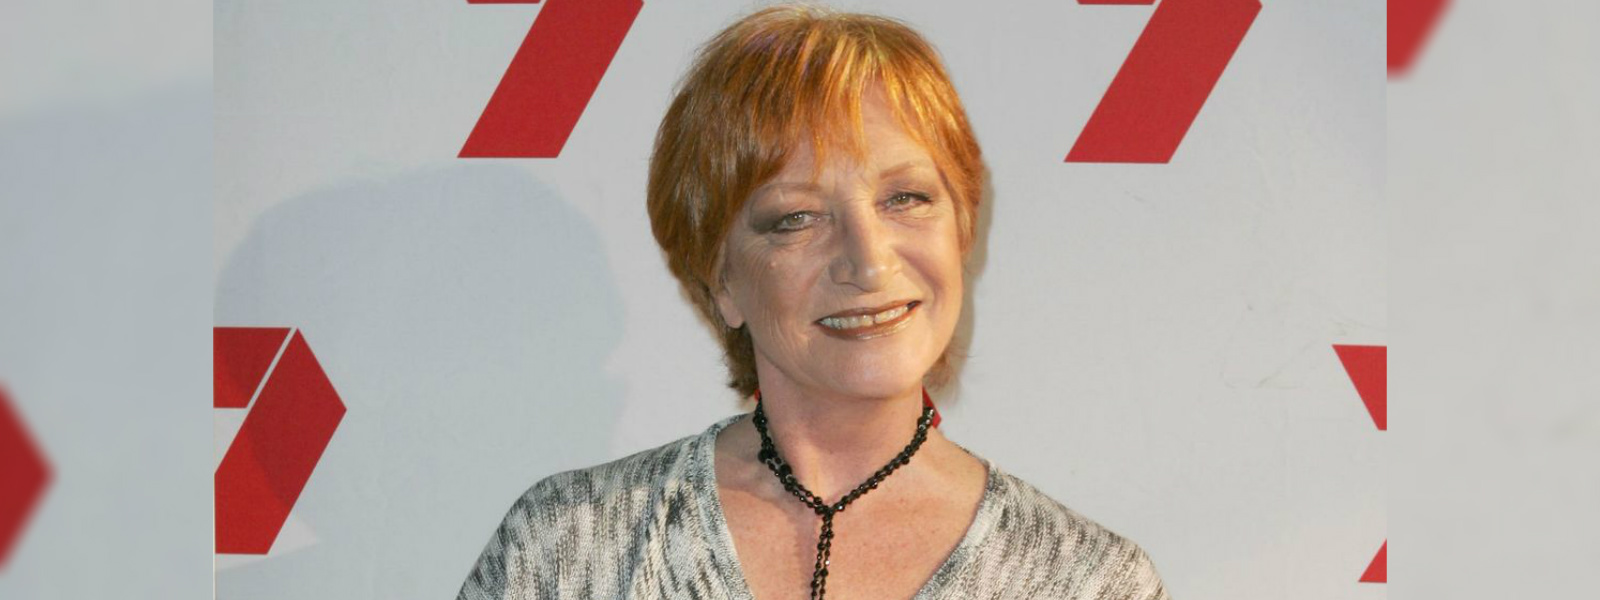 Home and Away actress dies aged 77